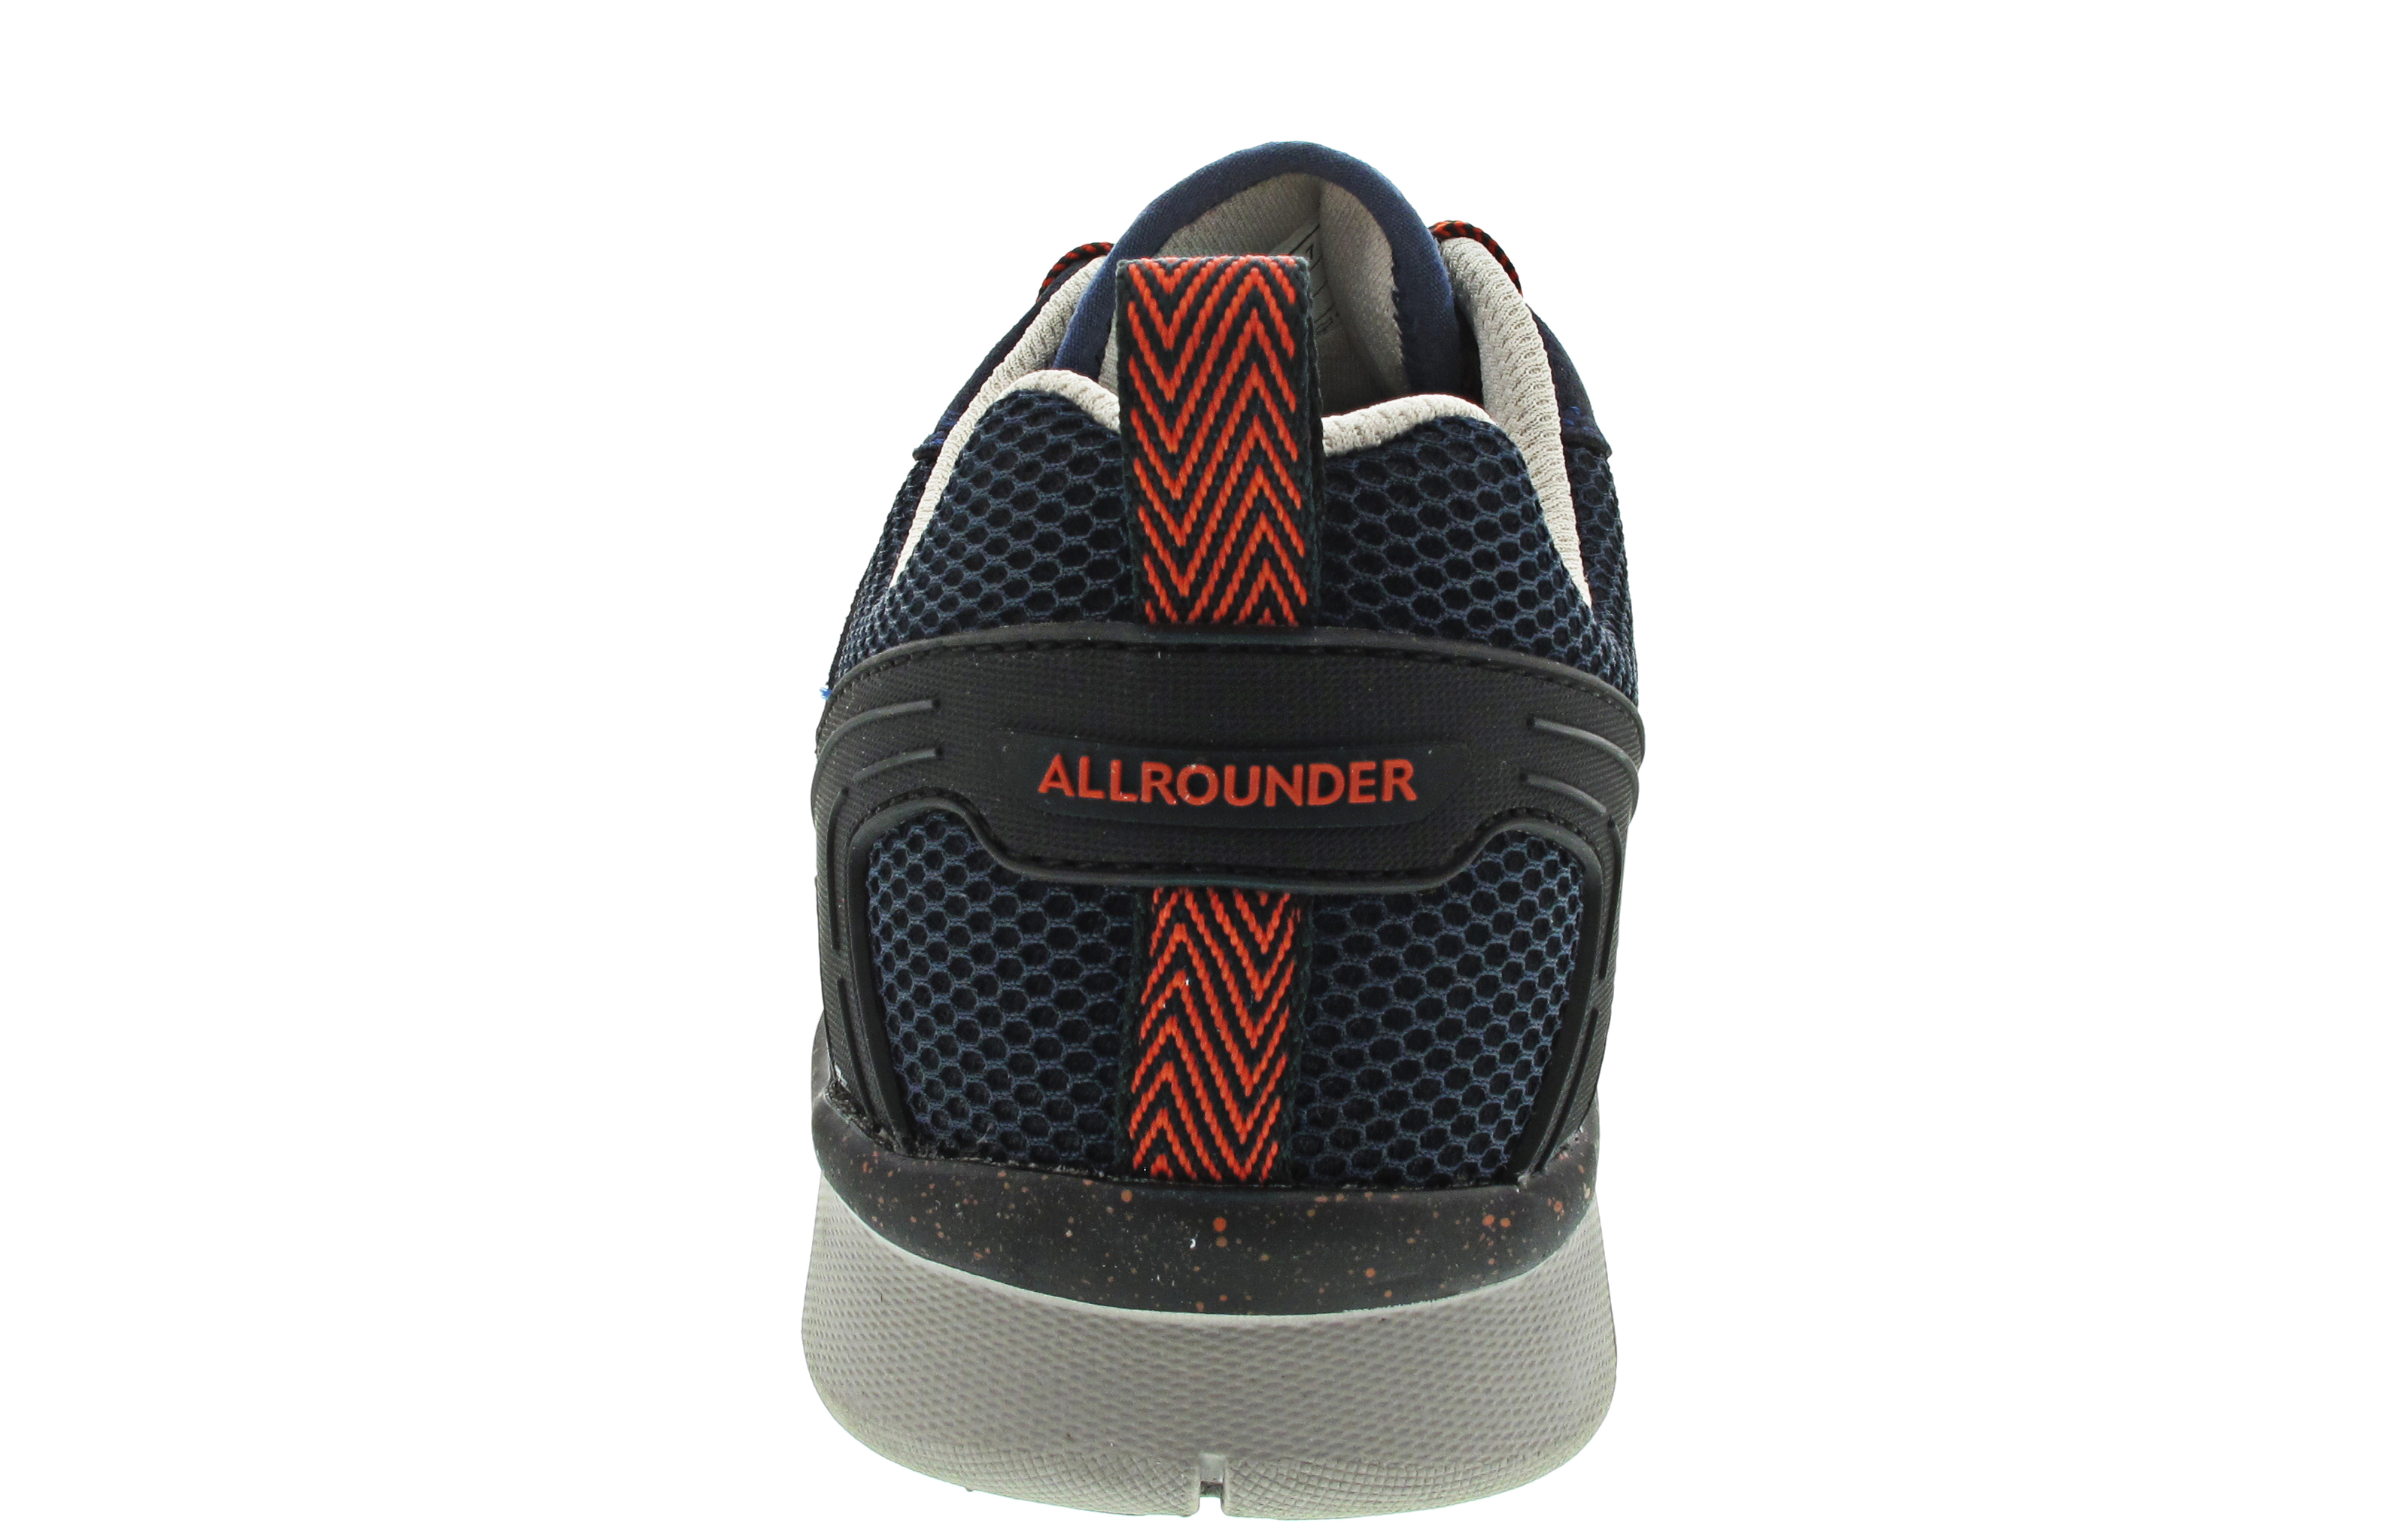 Allrounder by Mephisto Moment